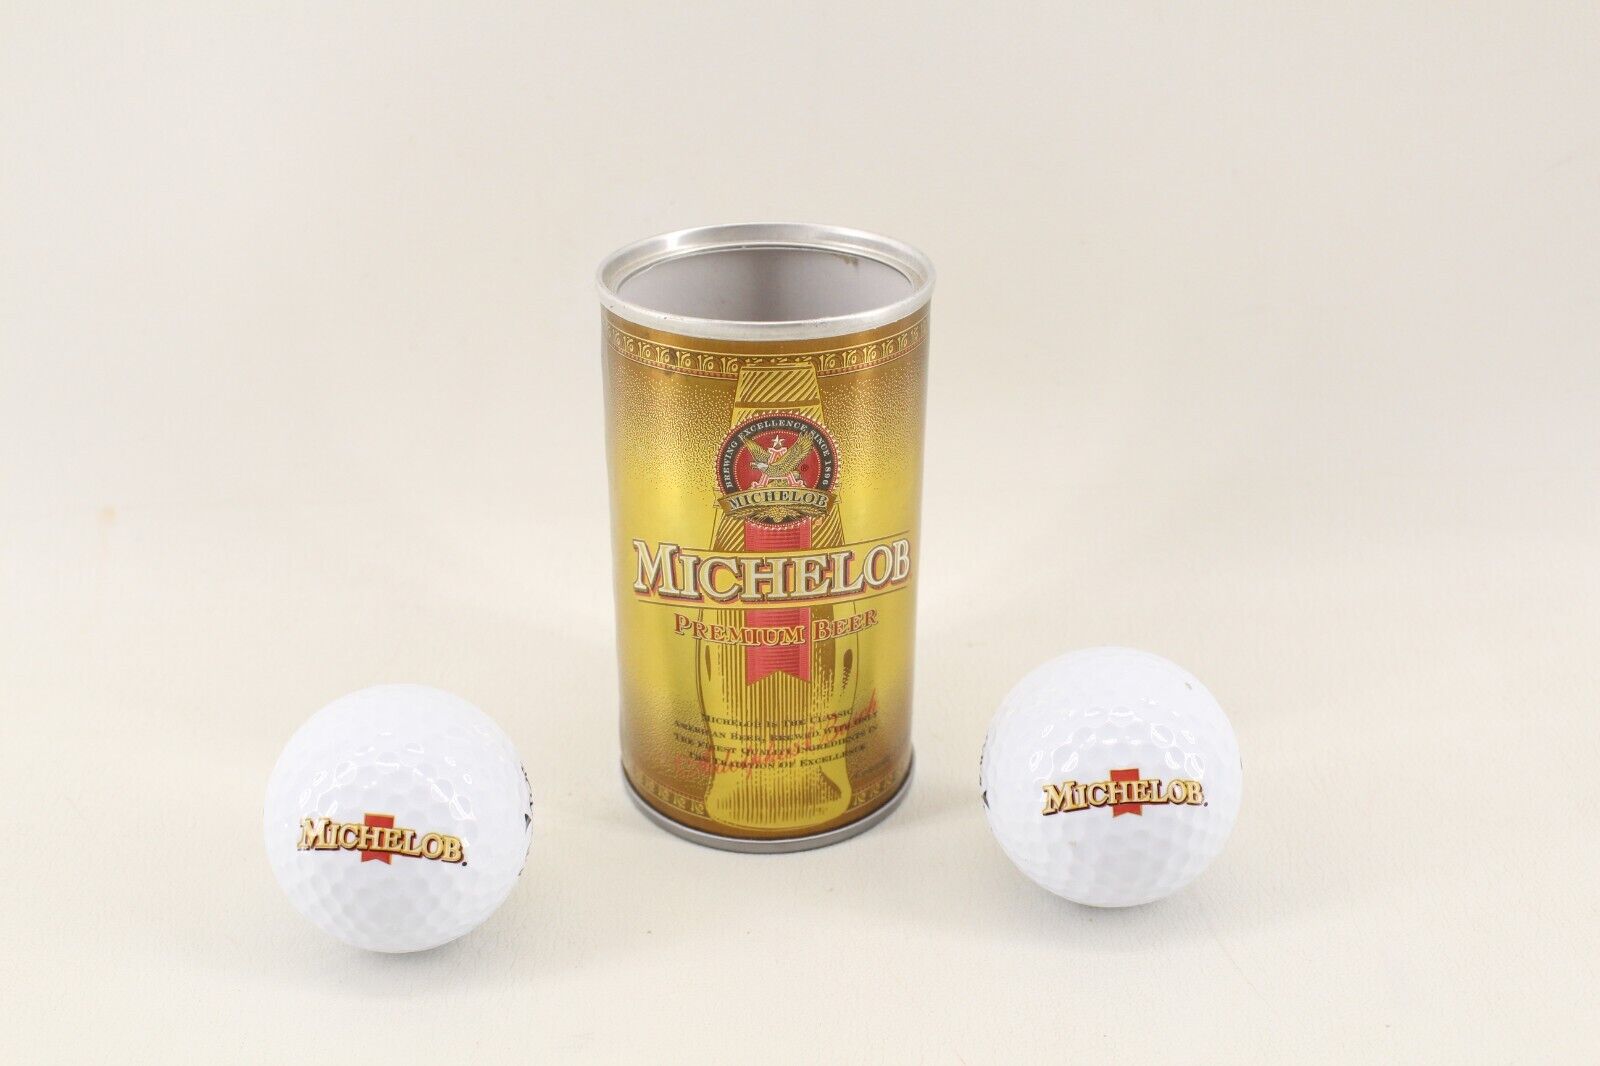 Vintage Michelob Premium Beer Can Containing Two Golf Balls, Opened